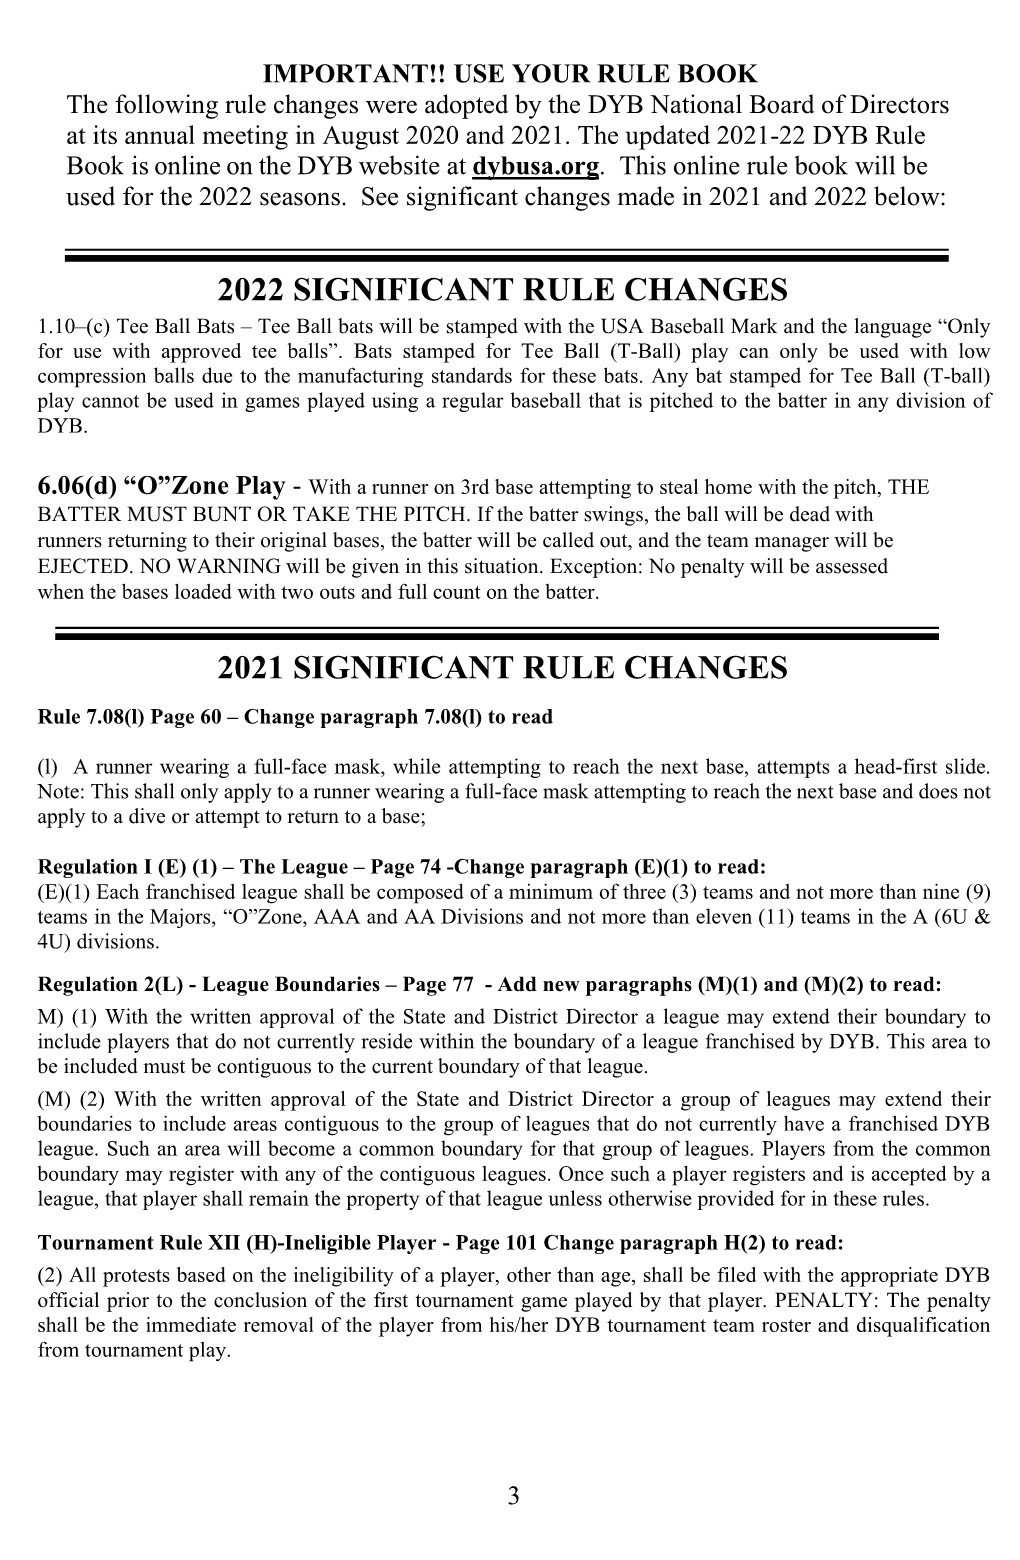 2022 Significant Rule Changes